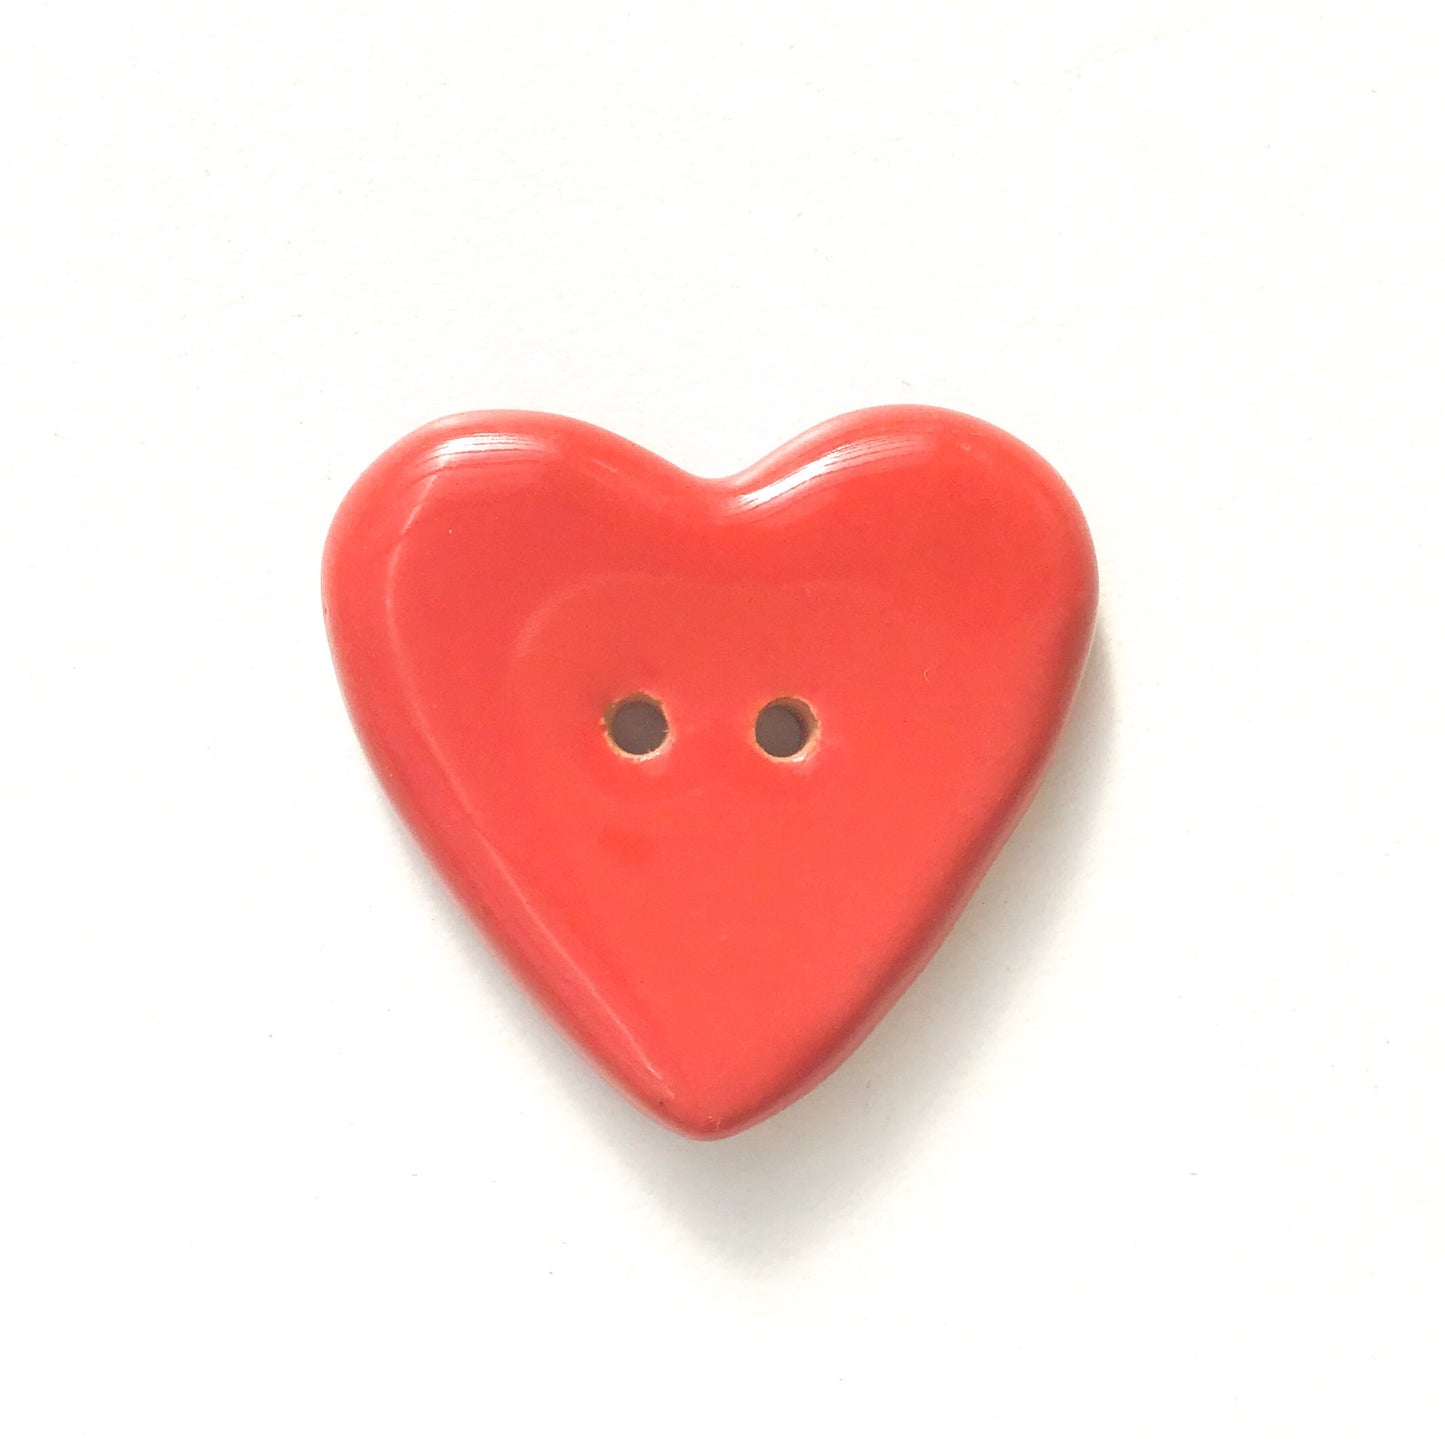 Chunky Red Heart Button - Ceramic Heart Button